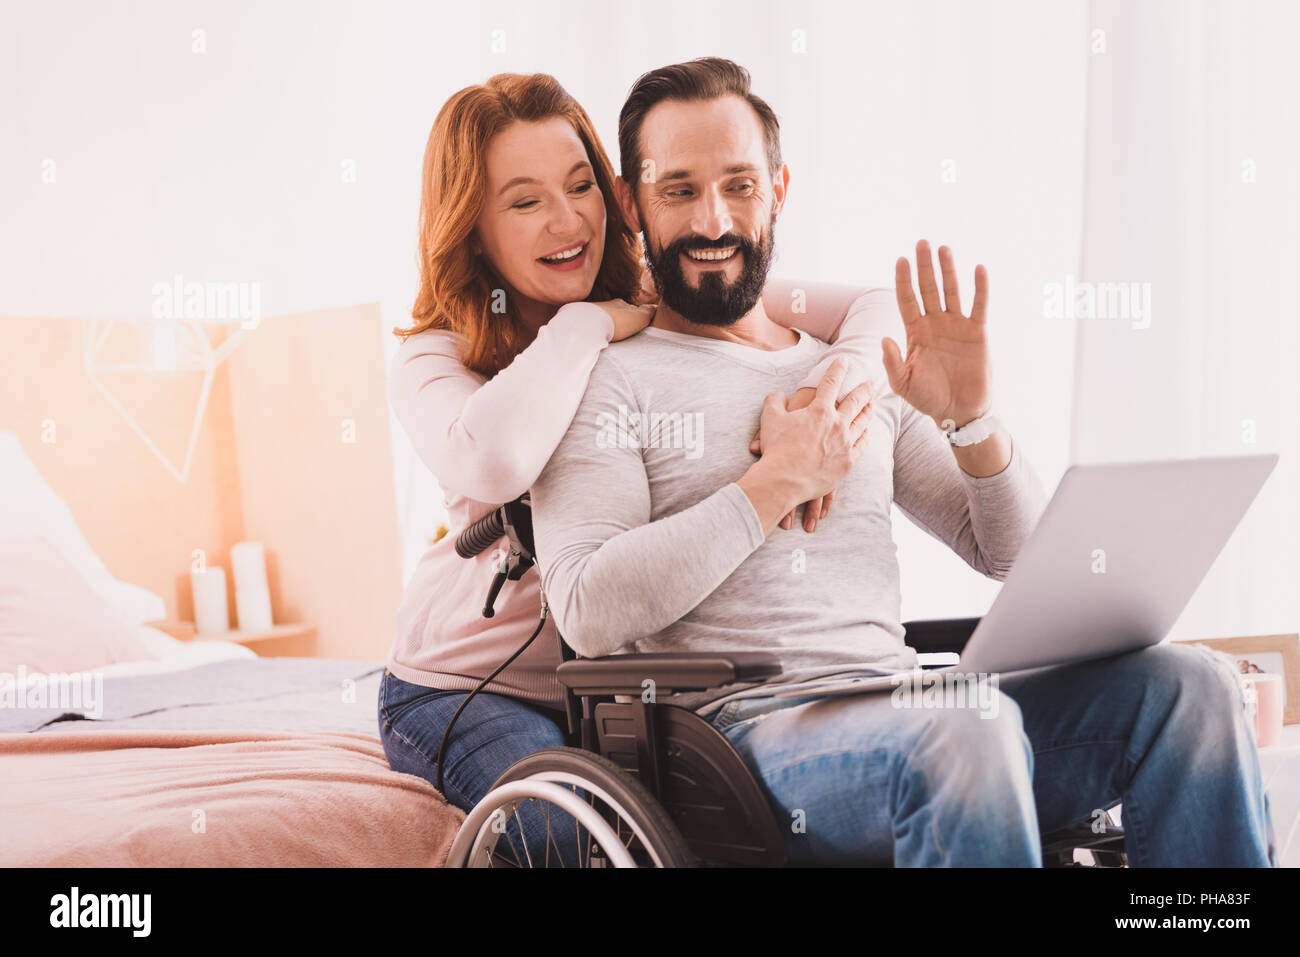 Cheerful couple using a laptop for communication Stock Photo